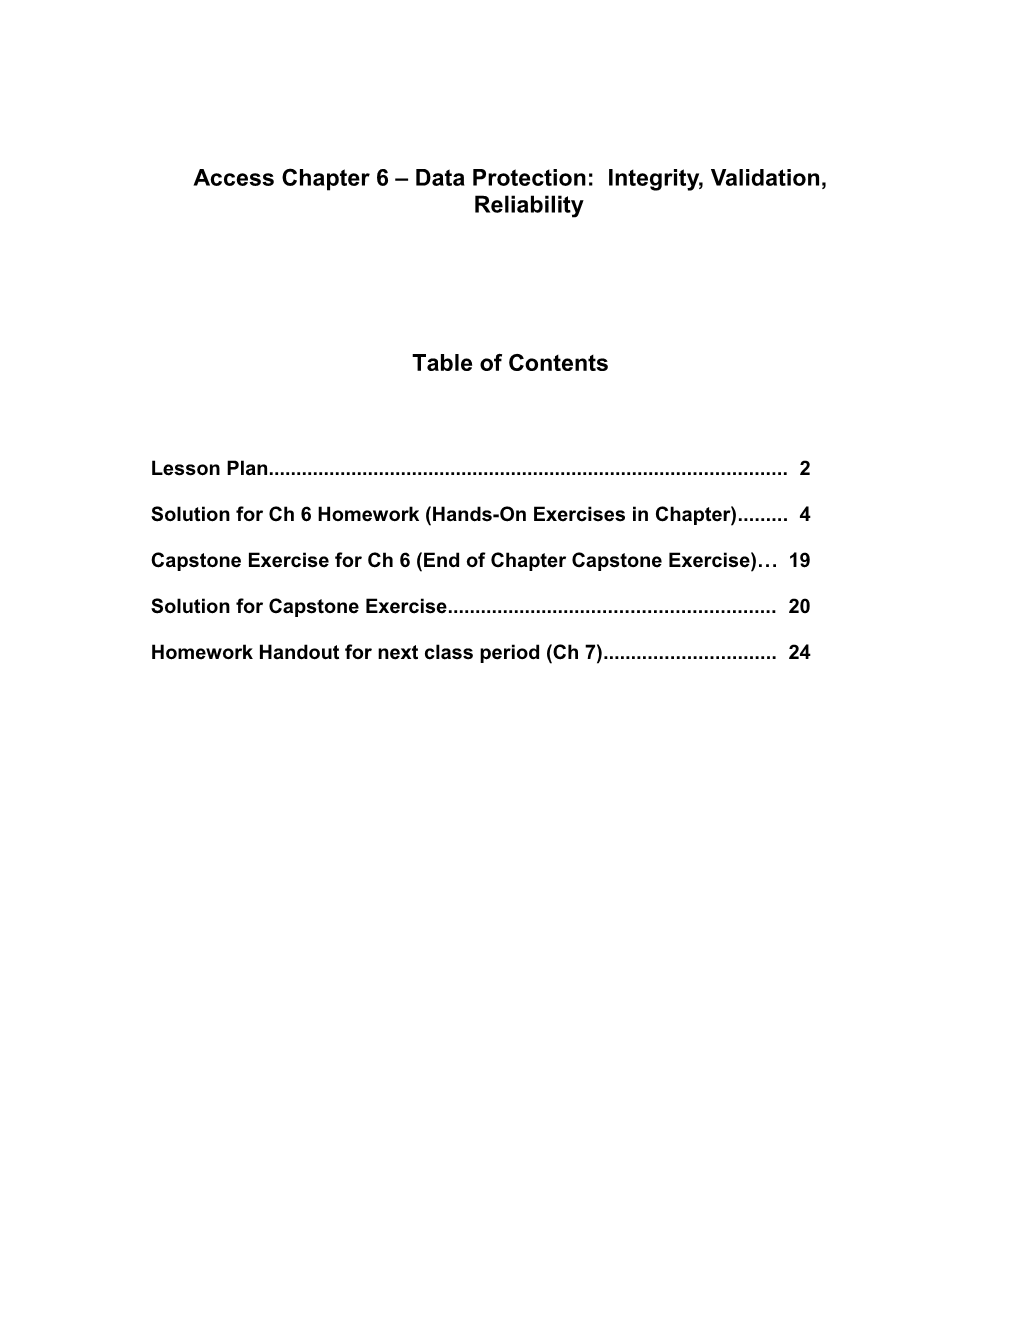 Access Chapter 6 Data Protection: Integrity, Validation, Reliability